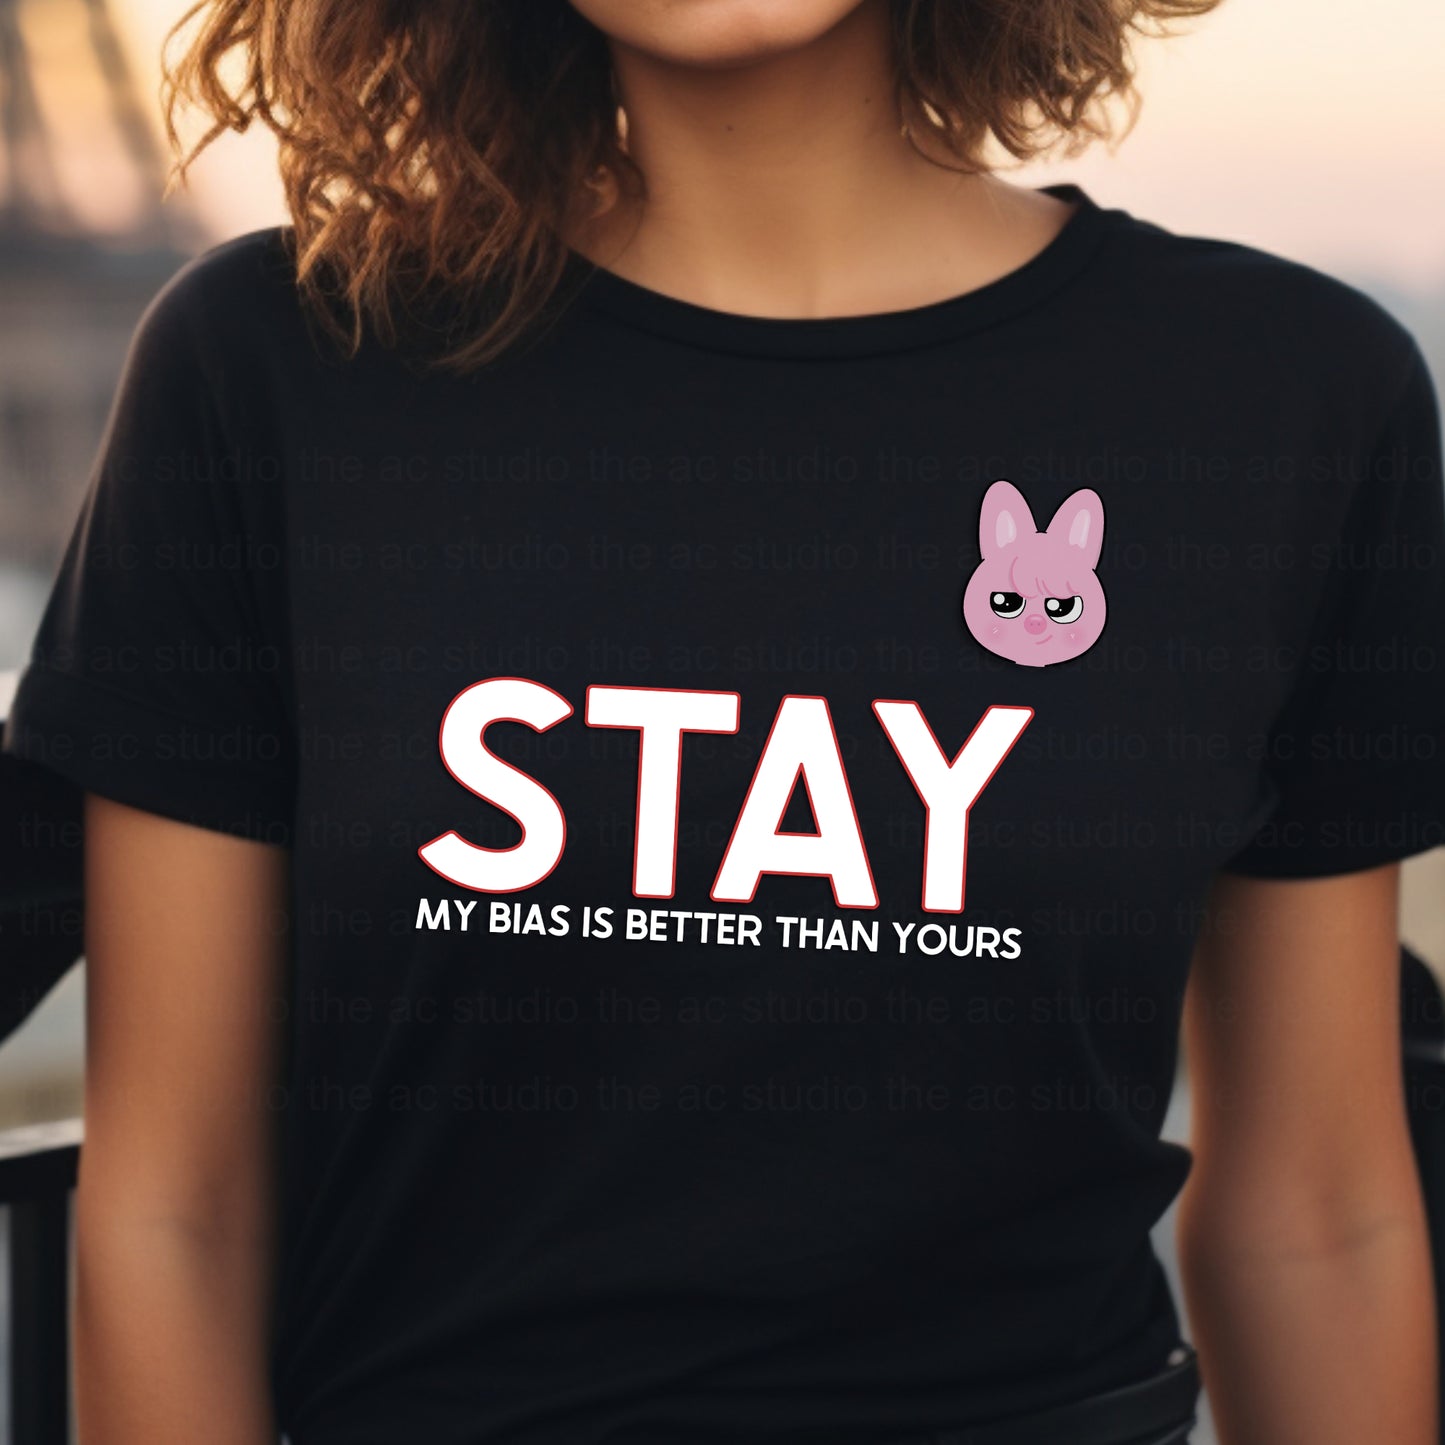 STAY - My Bias Is Better Than Yours T-Shirt (Black)